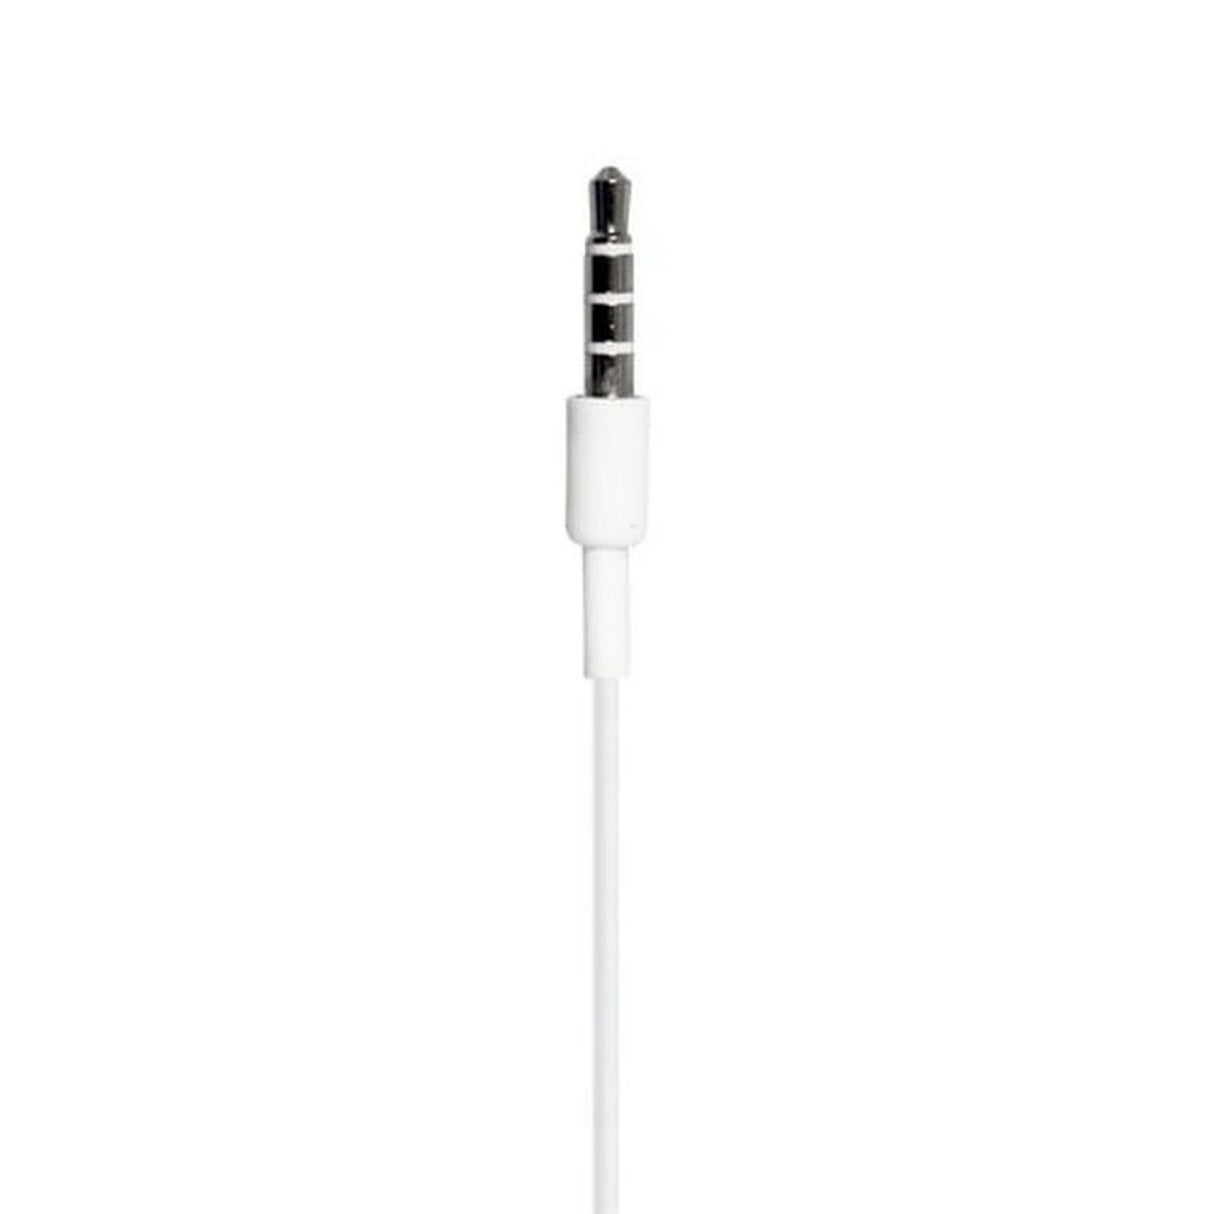 HamiltonBuhl ISD-EBA Ear Buds with In-Line Microphone